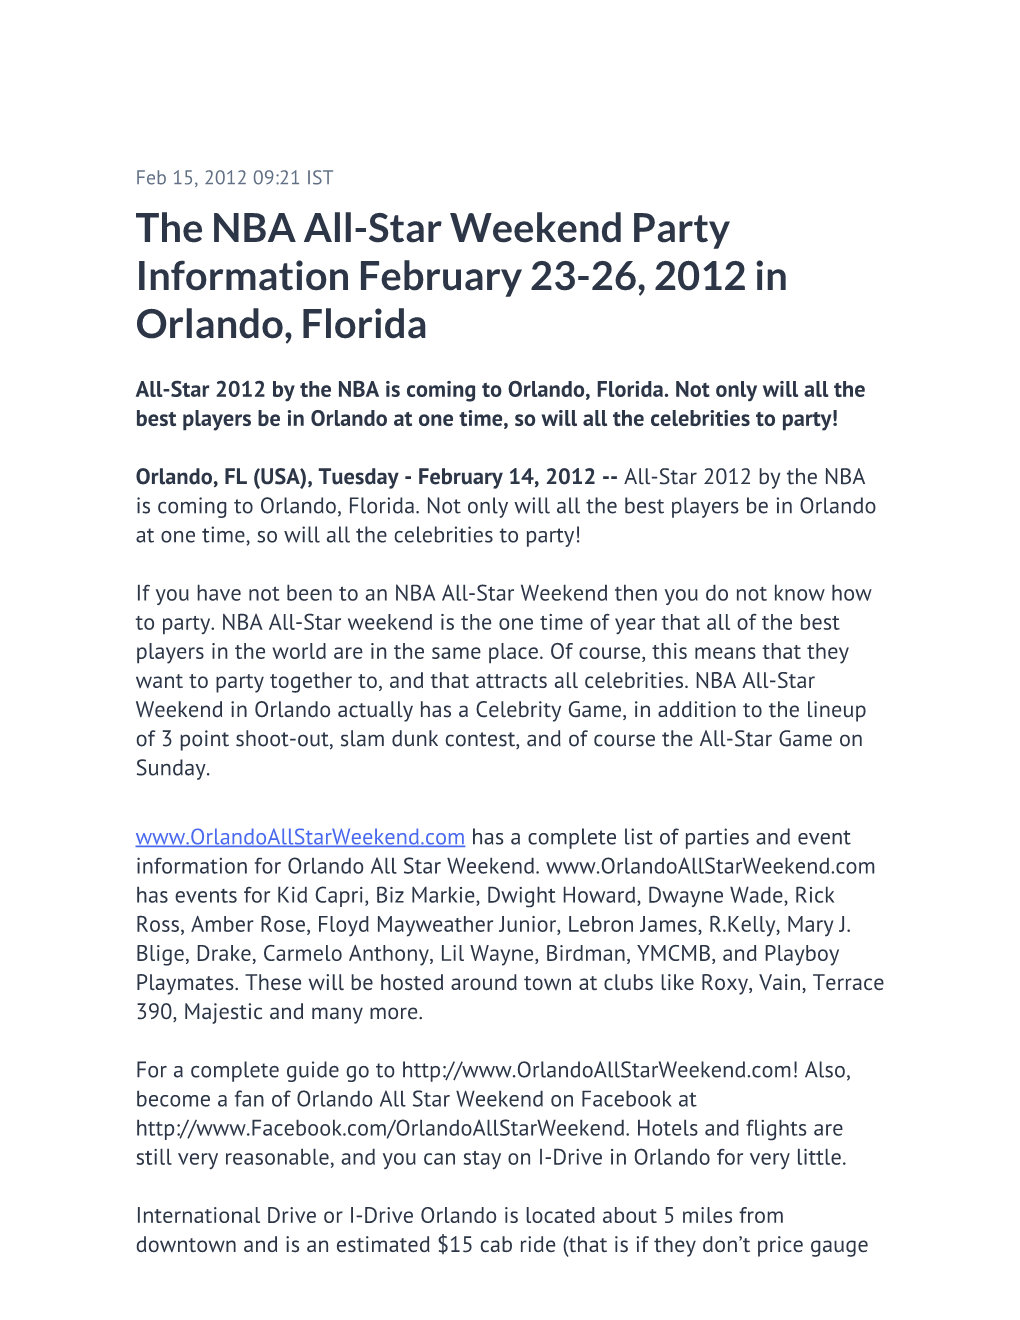 The NBA All-Star Weekend Party Information February 23-26, 2012 in Orlando, Florida